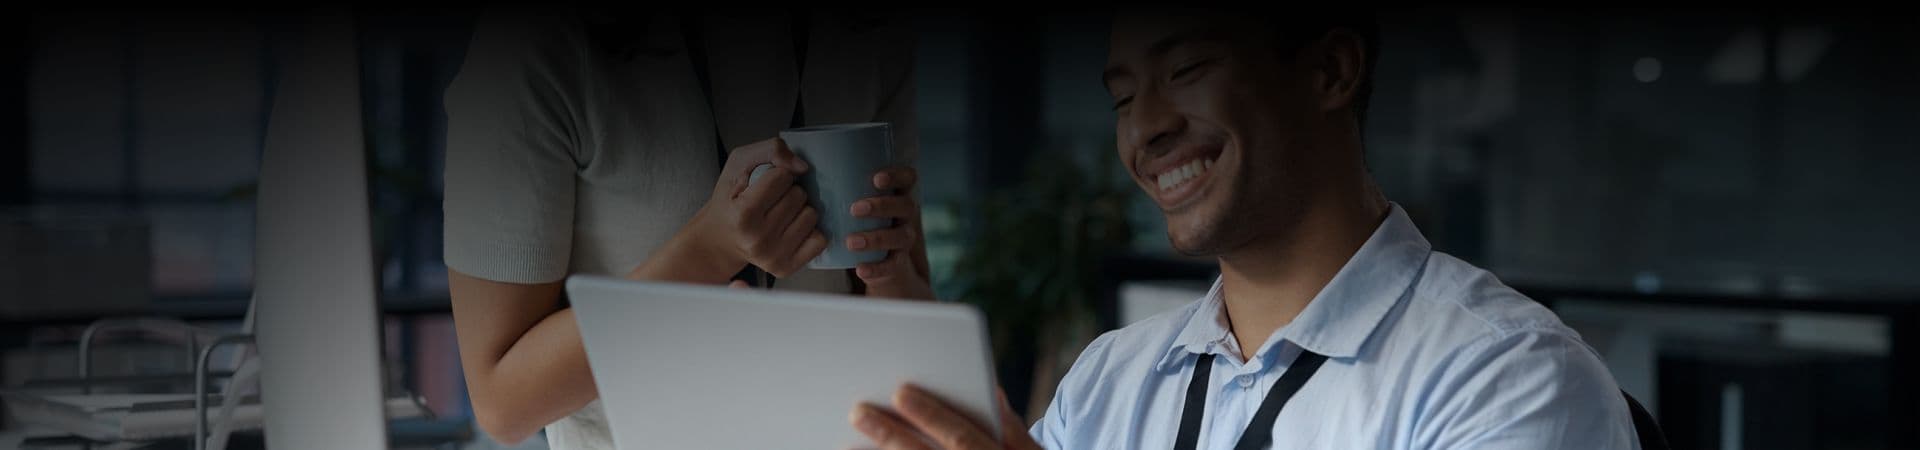 A picture of a man showing something on his tablet to a woman, and both of them sharing a laugh.